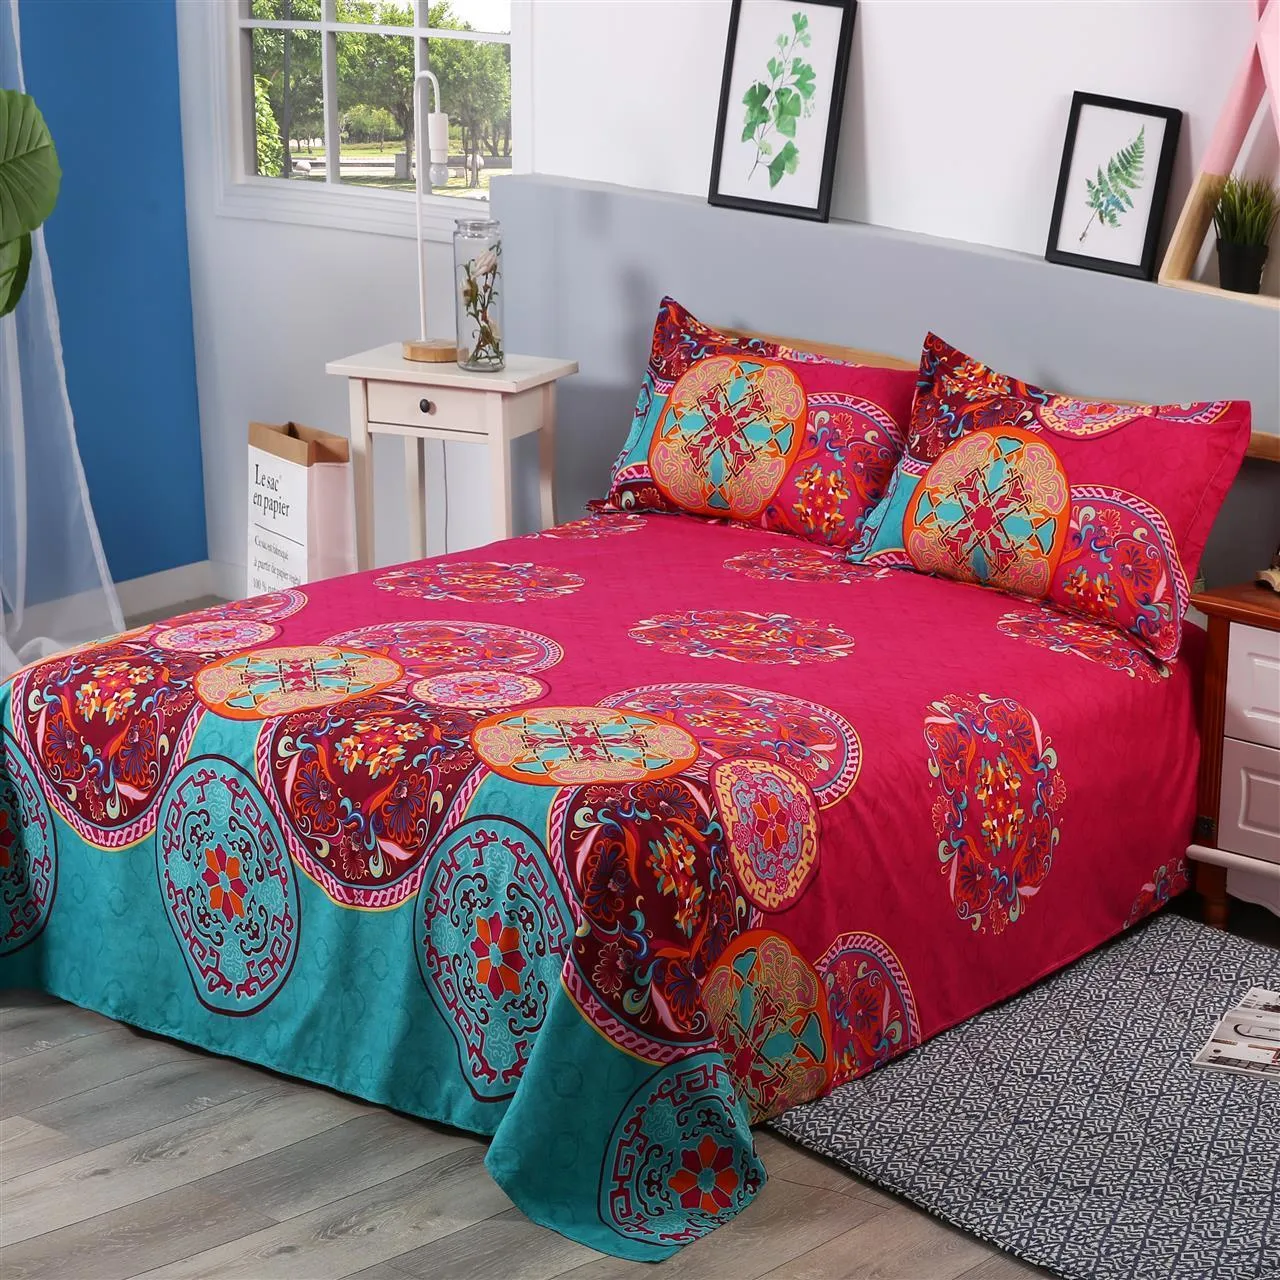 Bohemian Bed Cover 3d Mandala printing bed sheet Indian Home Decor Bedspread tapestry Wholesale Hot T200409